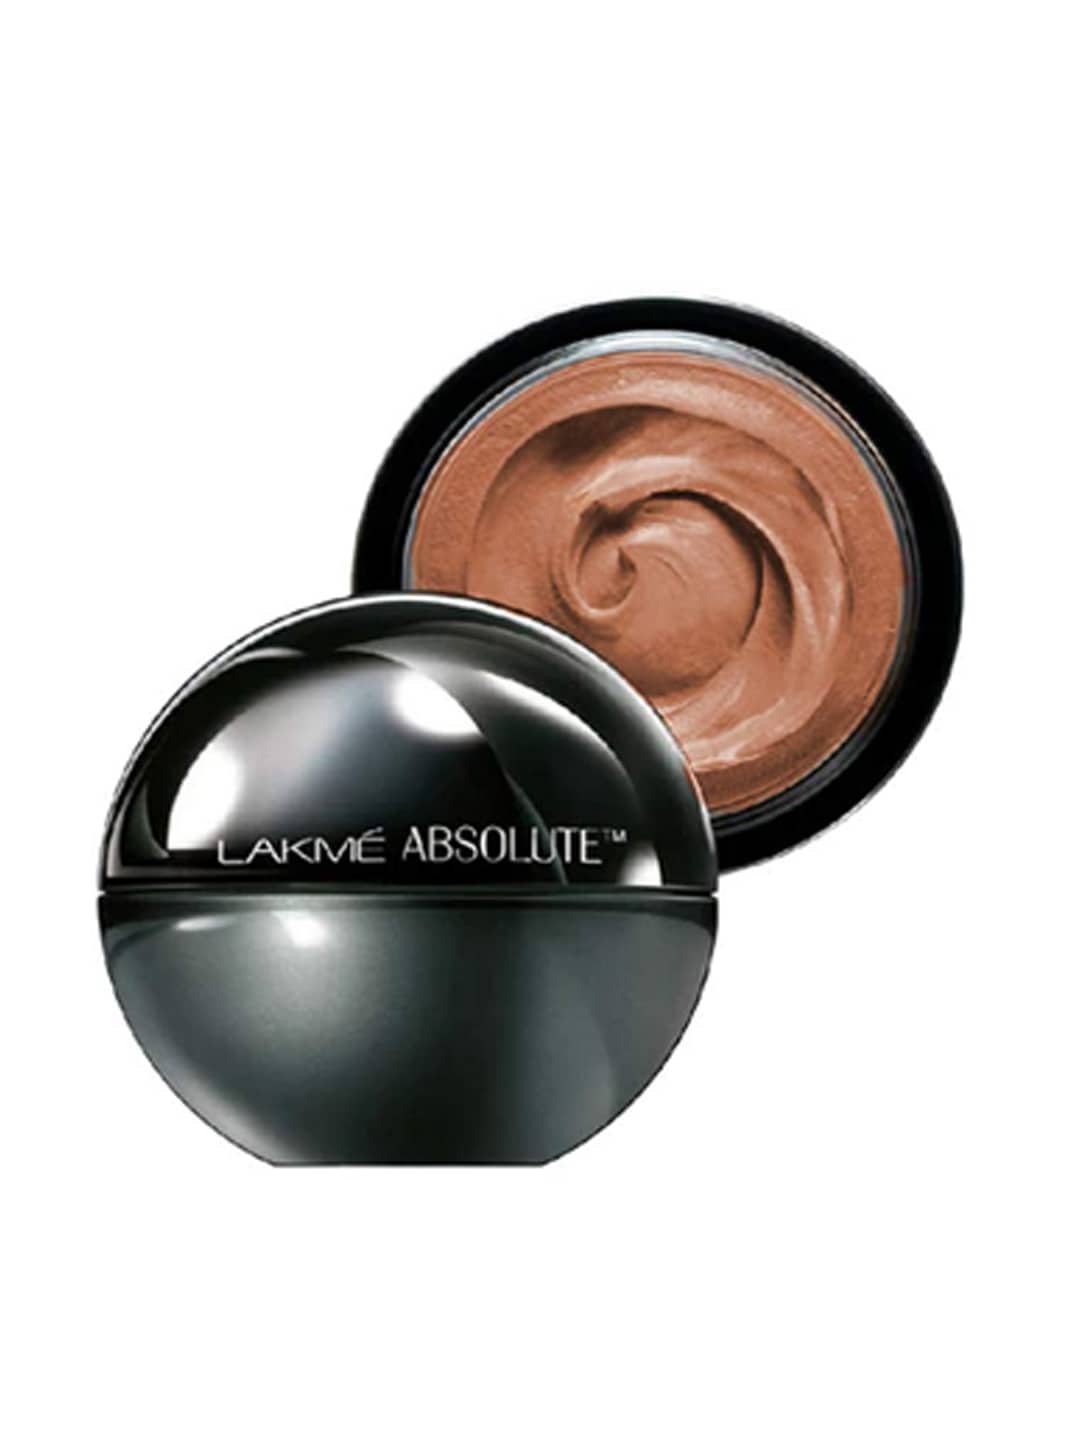 Lakme Absolute Mattreal Skin Natural Mousse - Rich Walnut 09 25g Price in India